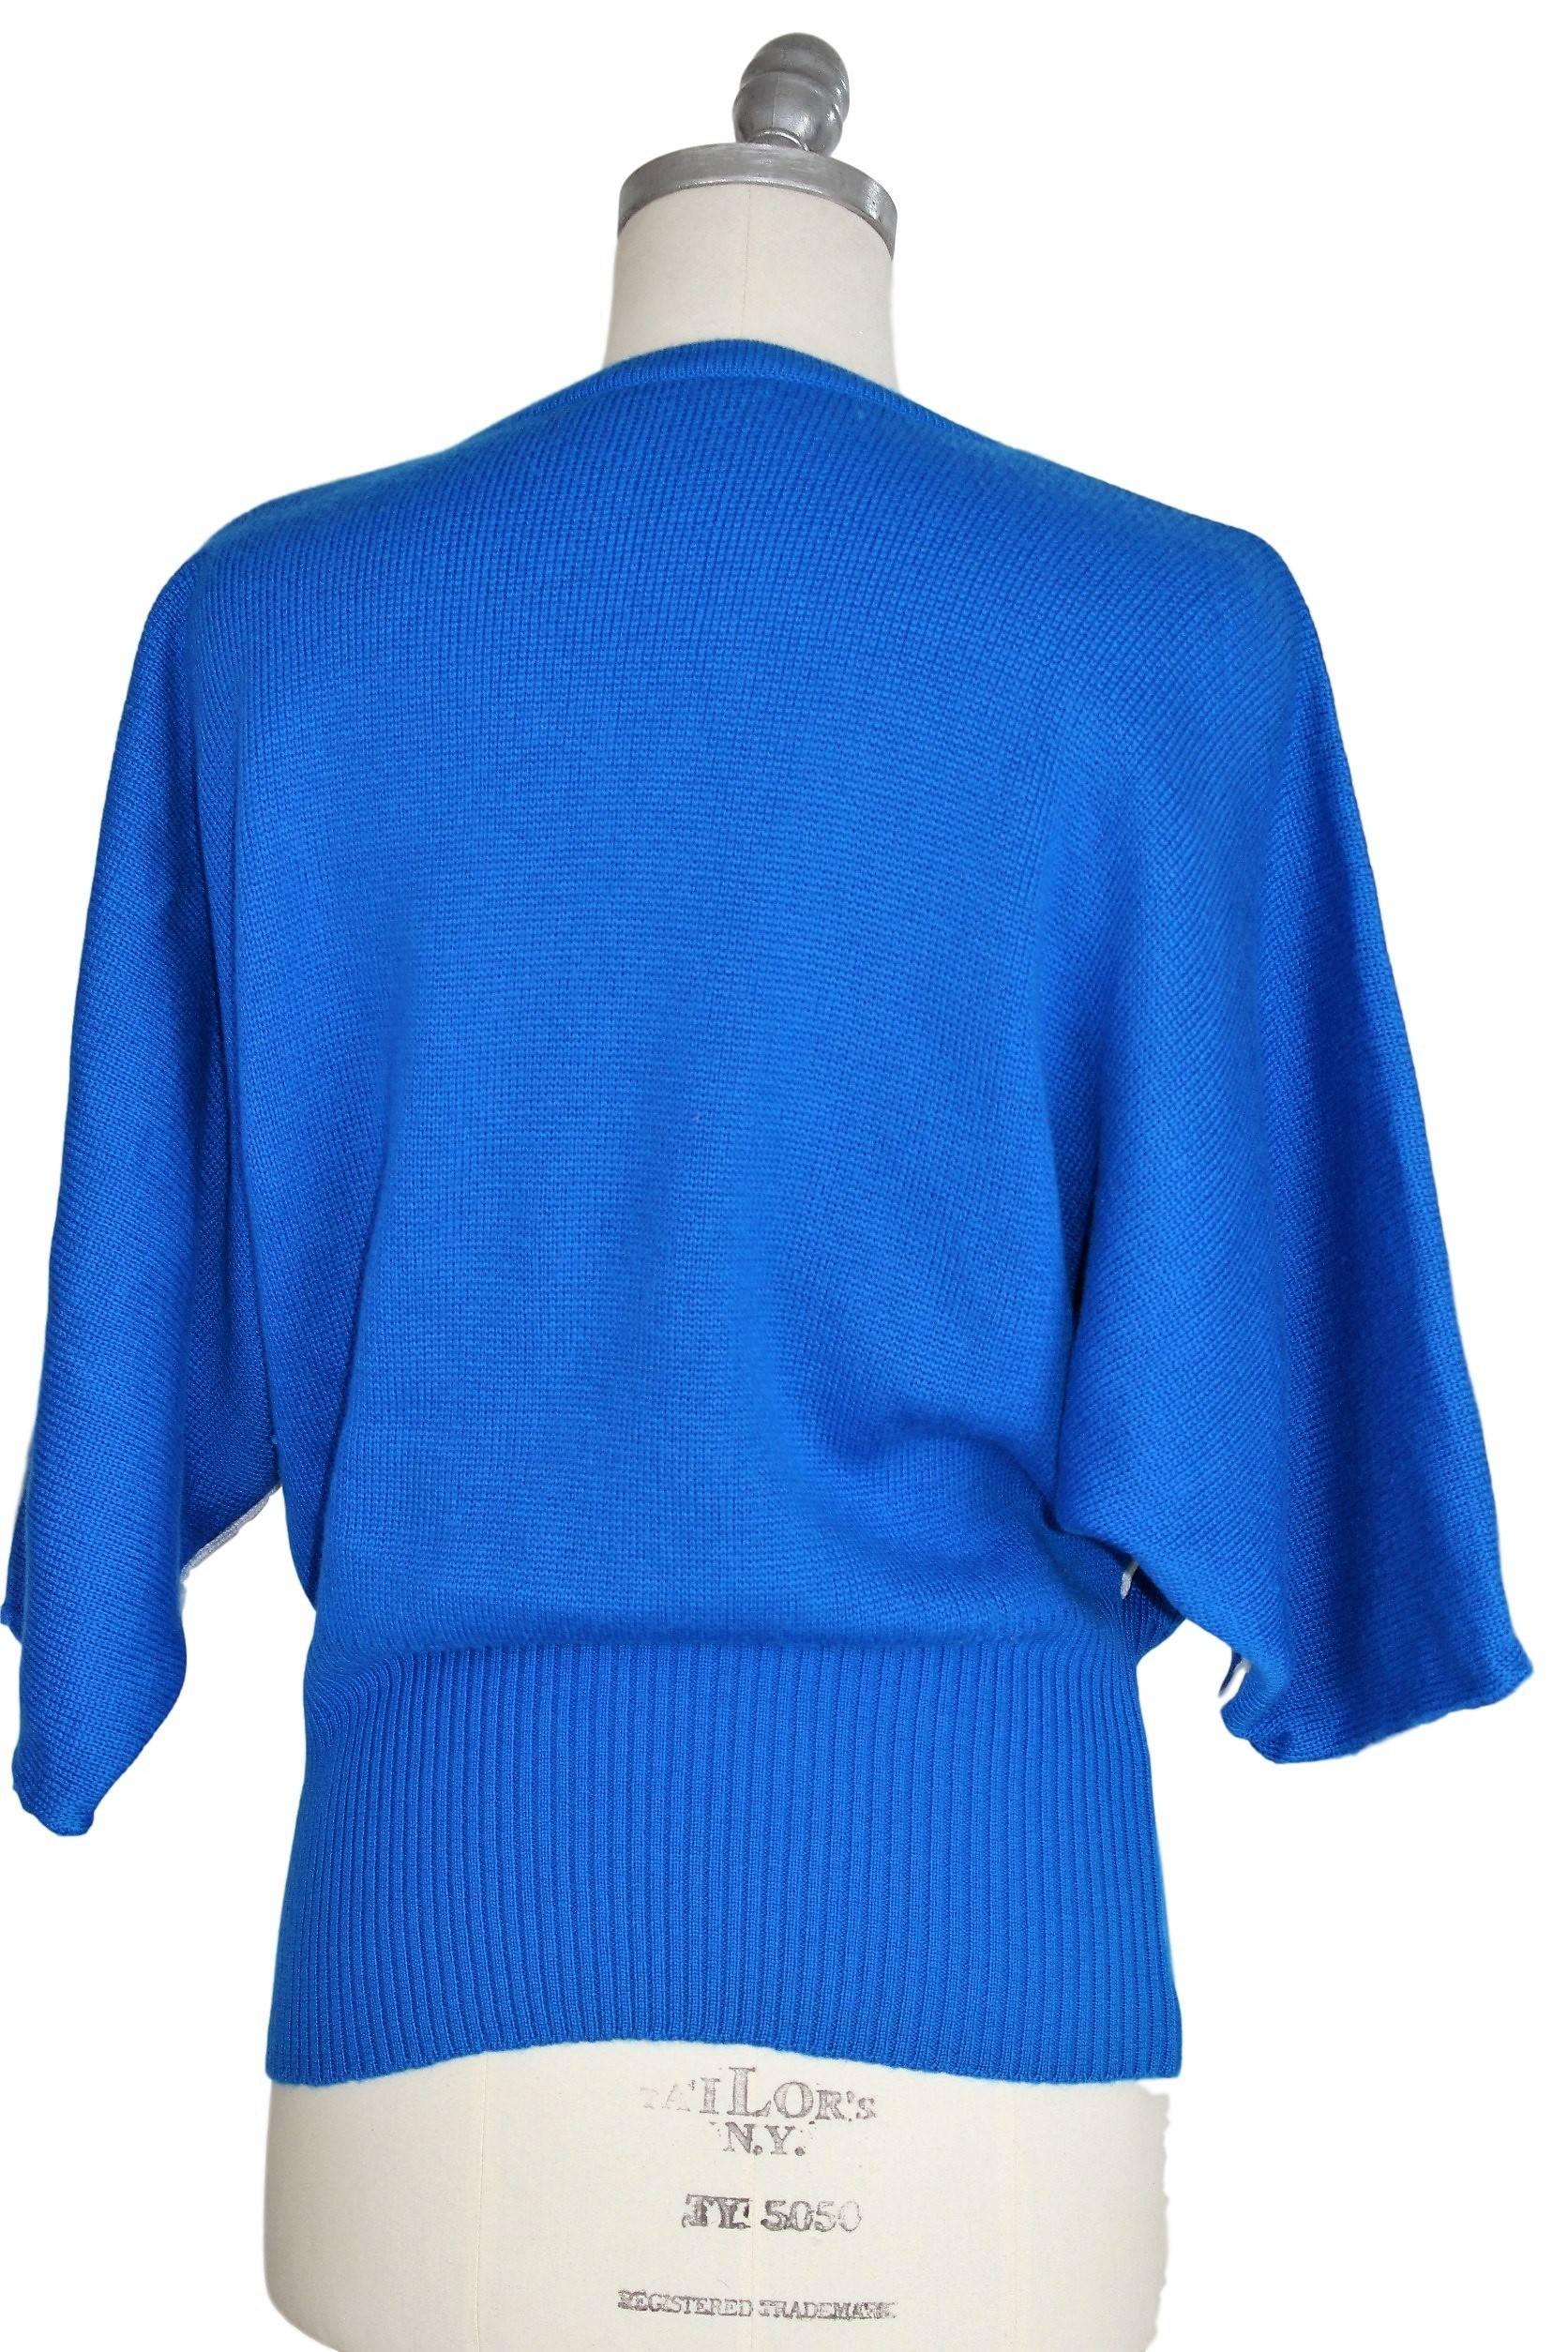 Pierre Cardin Paris Batwing Blue V-Neck Sweater, 1980 In Excellent Condition For Sale In Brindisi, IT